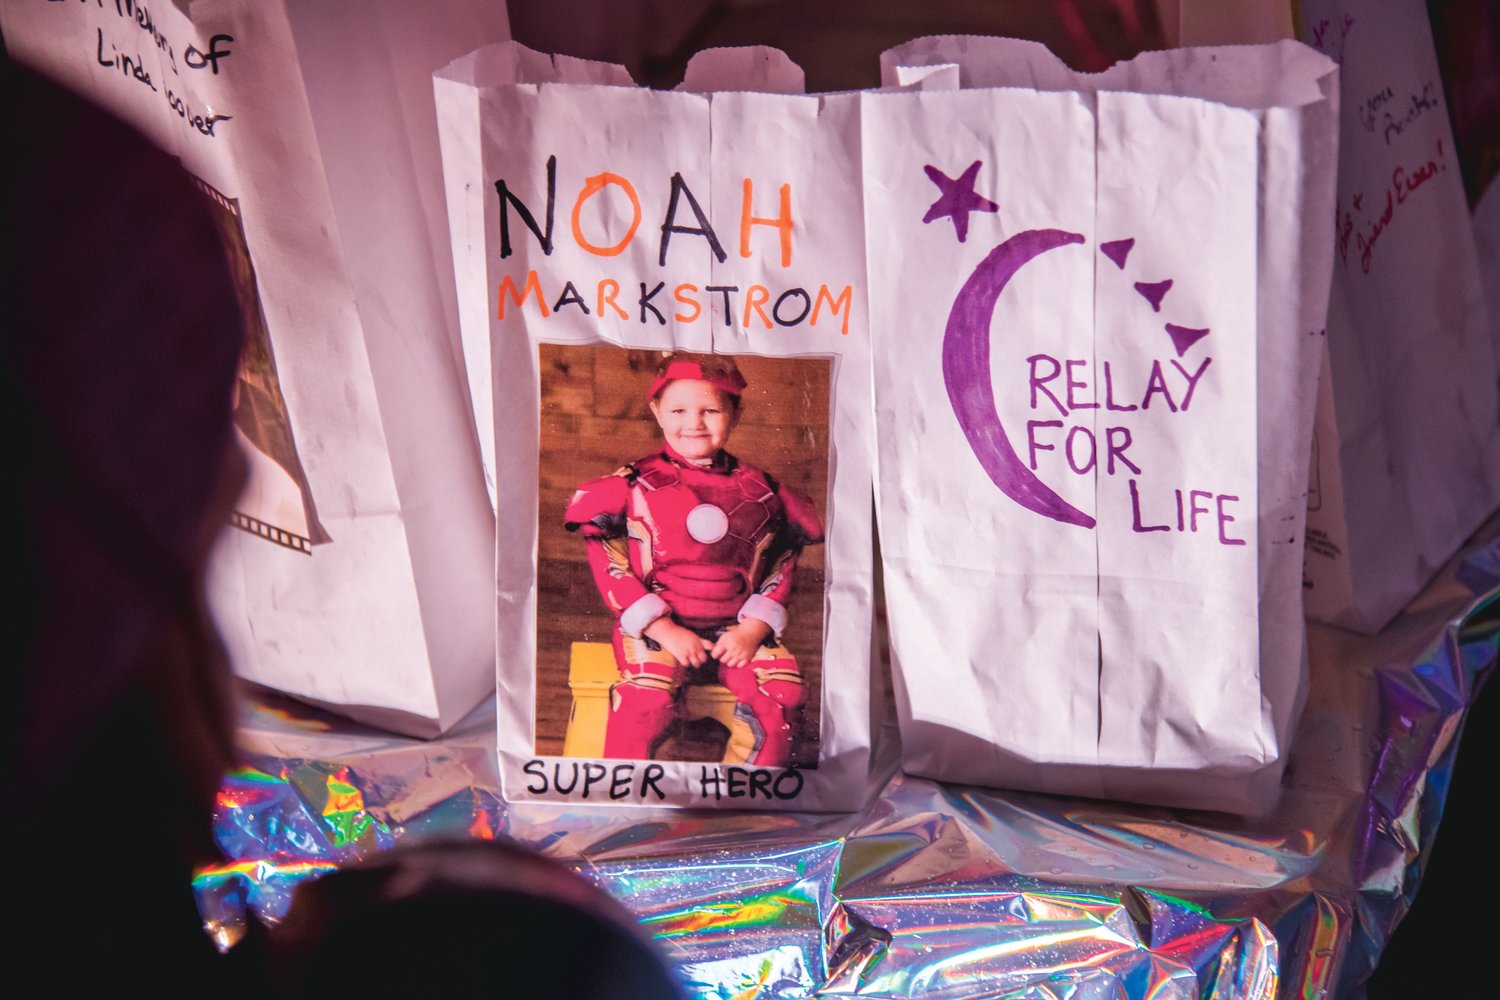 A memorial for Noah Markstrom is displayed during a Relay For Life Luminaria at George Washington Park in Centralia Saturday night.